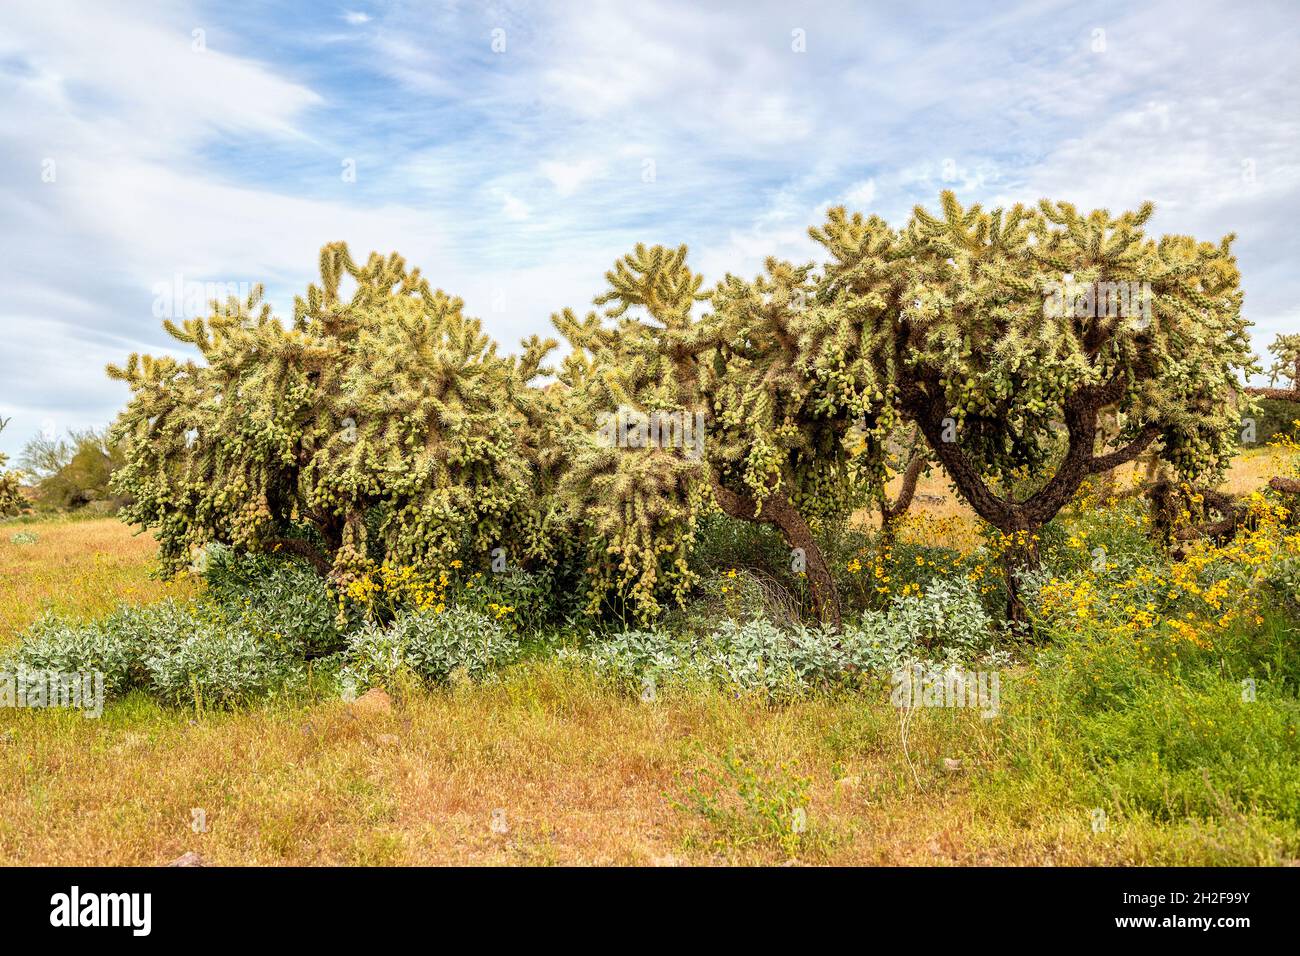 Chain fruit cholla in clonal colony with yellow brittlebush in bloom. Desert plants in the AZ low desert springtime on a cloudy day. Colorful desert. Stock Photo